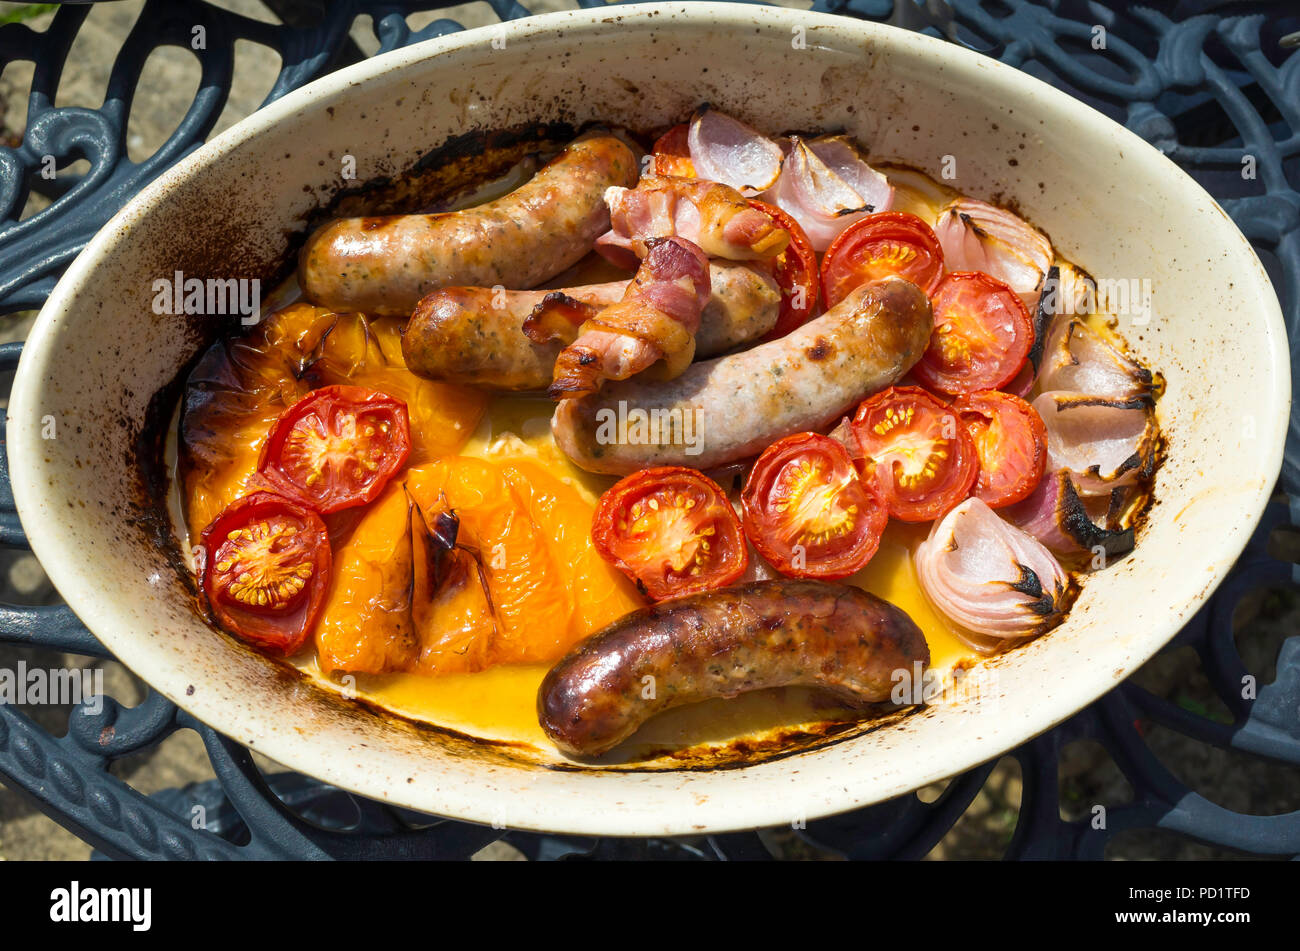 Oven roasted Pork Sausages bacon yellow peppers tomatoes and onions in an oval dish on an outside table ready for serving alfresco Stock Photo